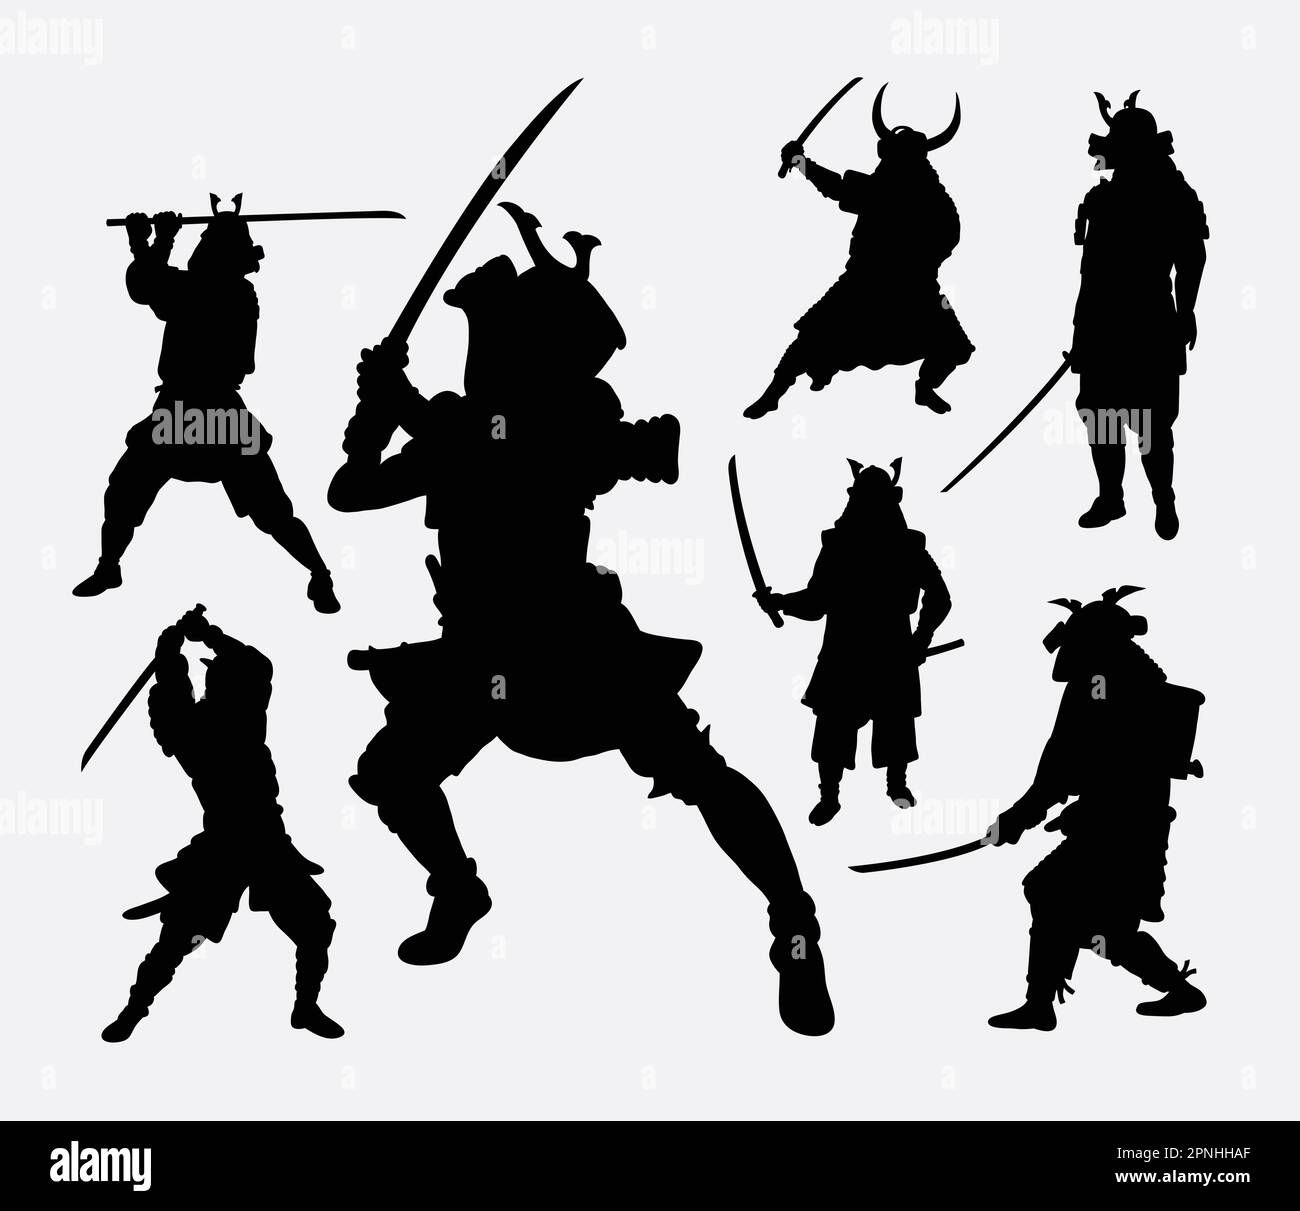 Samurai japanese warrior, martial art silhouette. Good use for symbol, logo, web icon, mascot, game elements, or any design you want Stock Vector